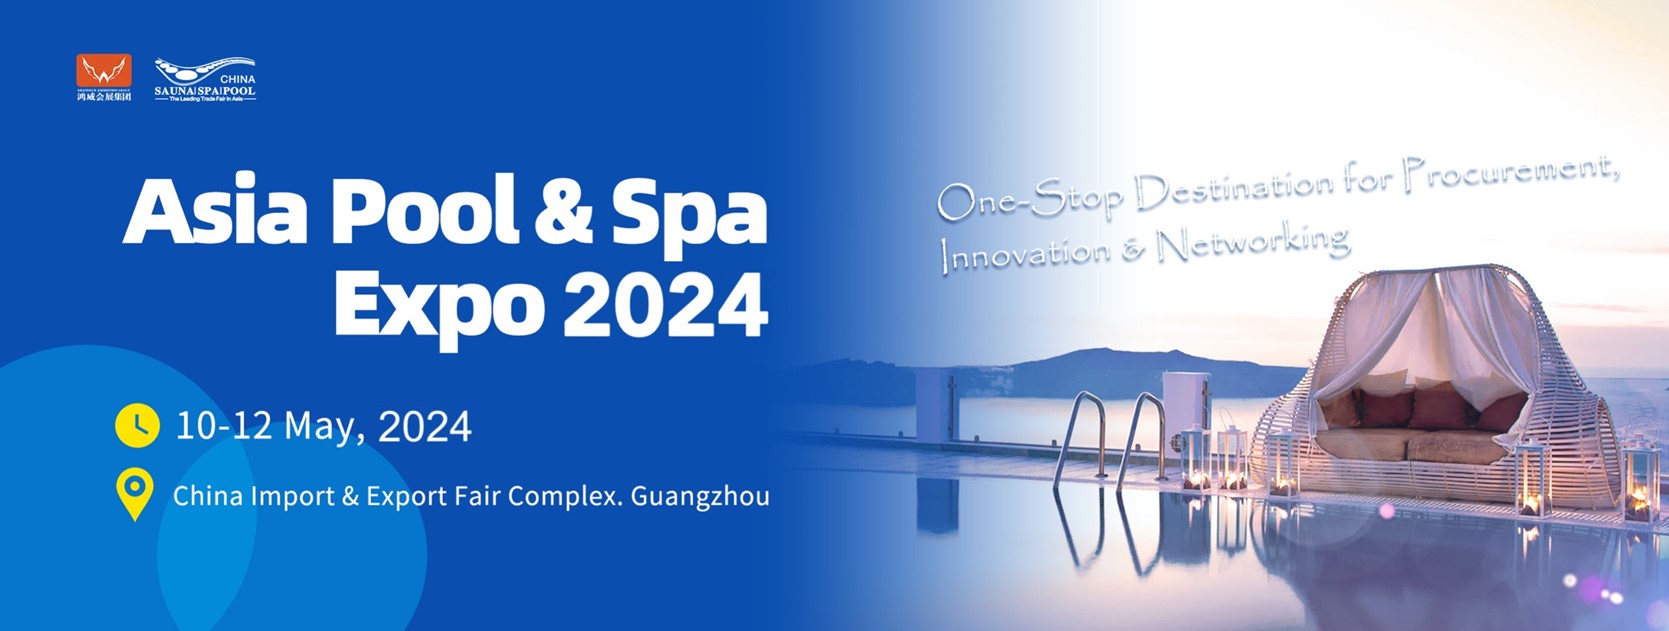 Asia Pool & Spa Expo 2024 Elevating Opportunities for International